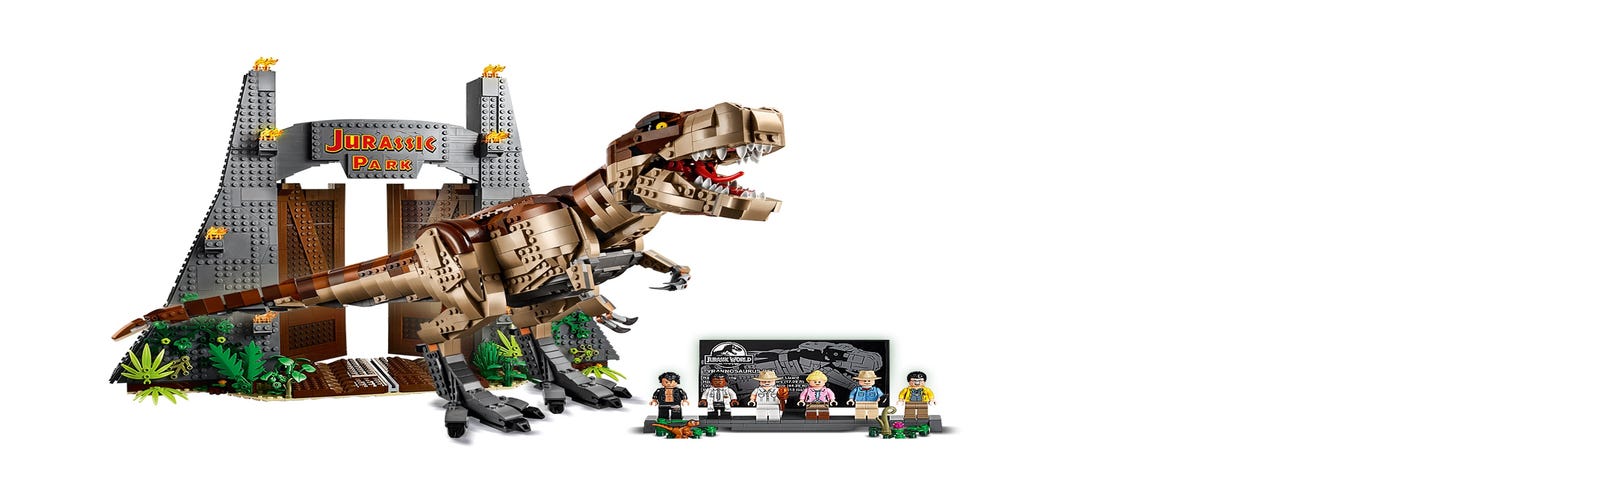 Jurassic Park: rex 75936 | World™ | Buy online at the Official LEGO® Shop